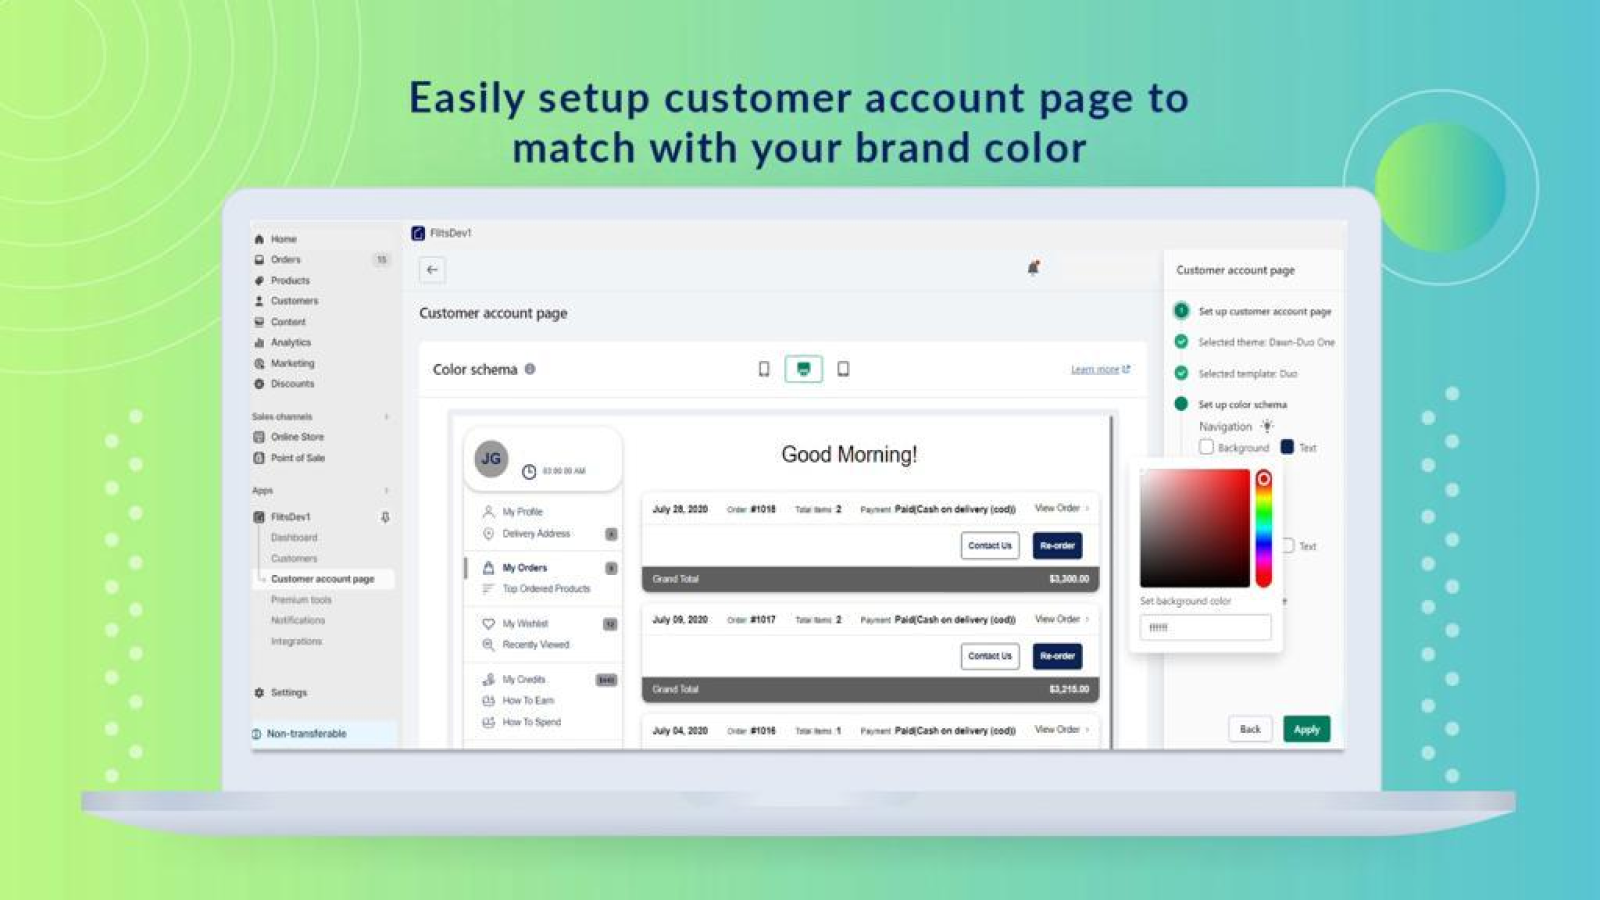 Setup account page easily as per your brand color